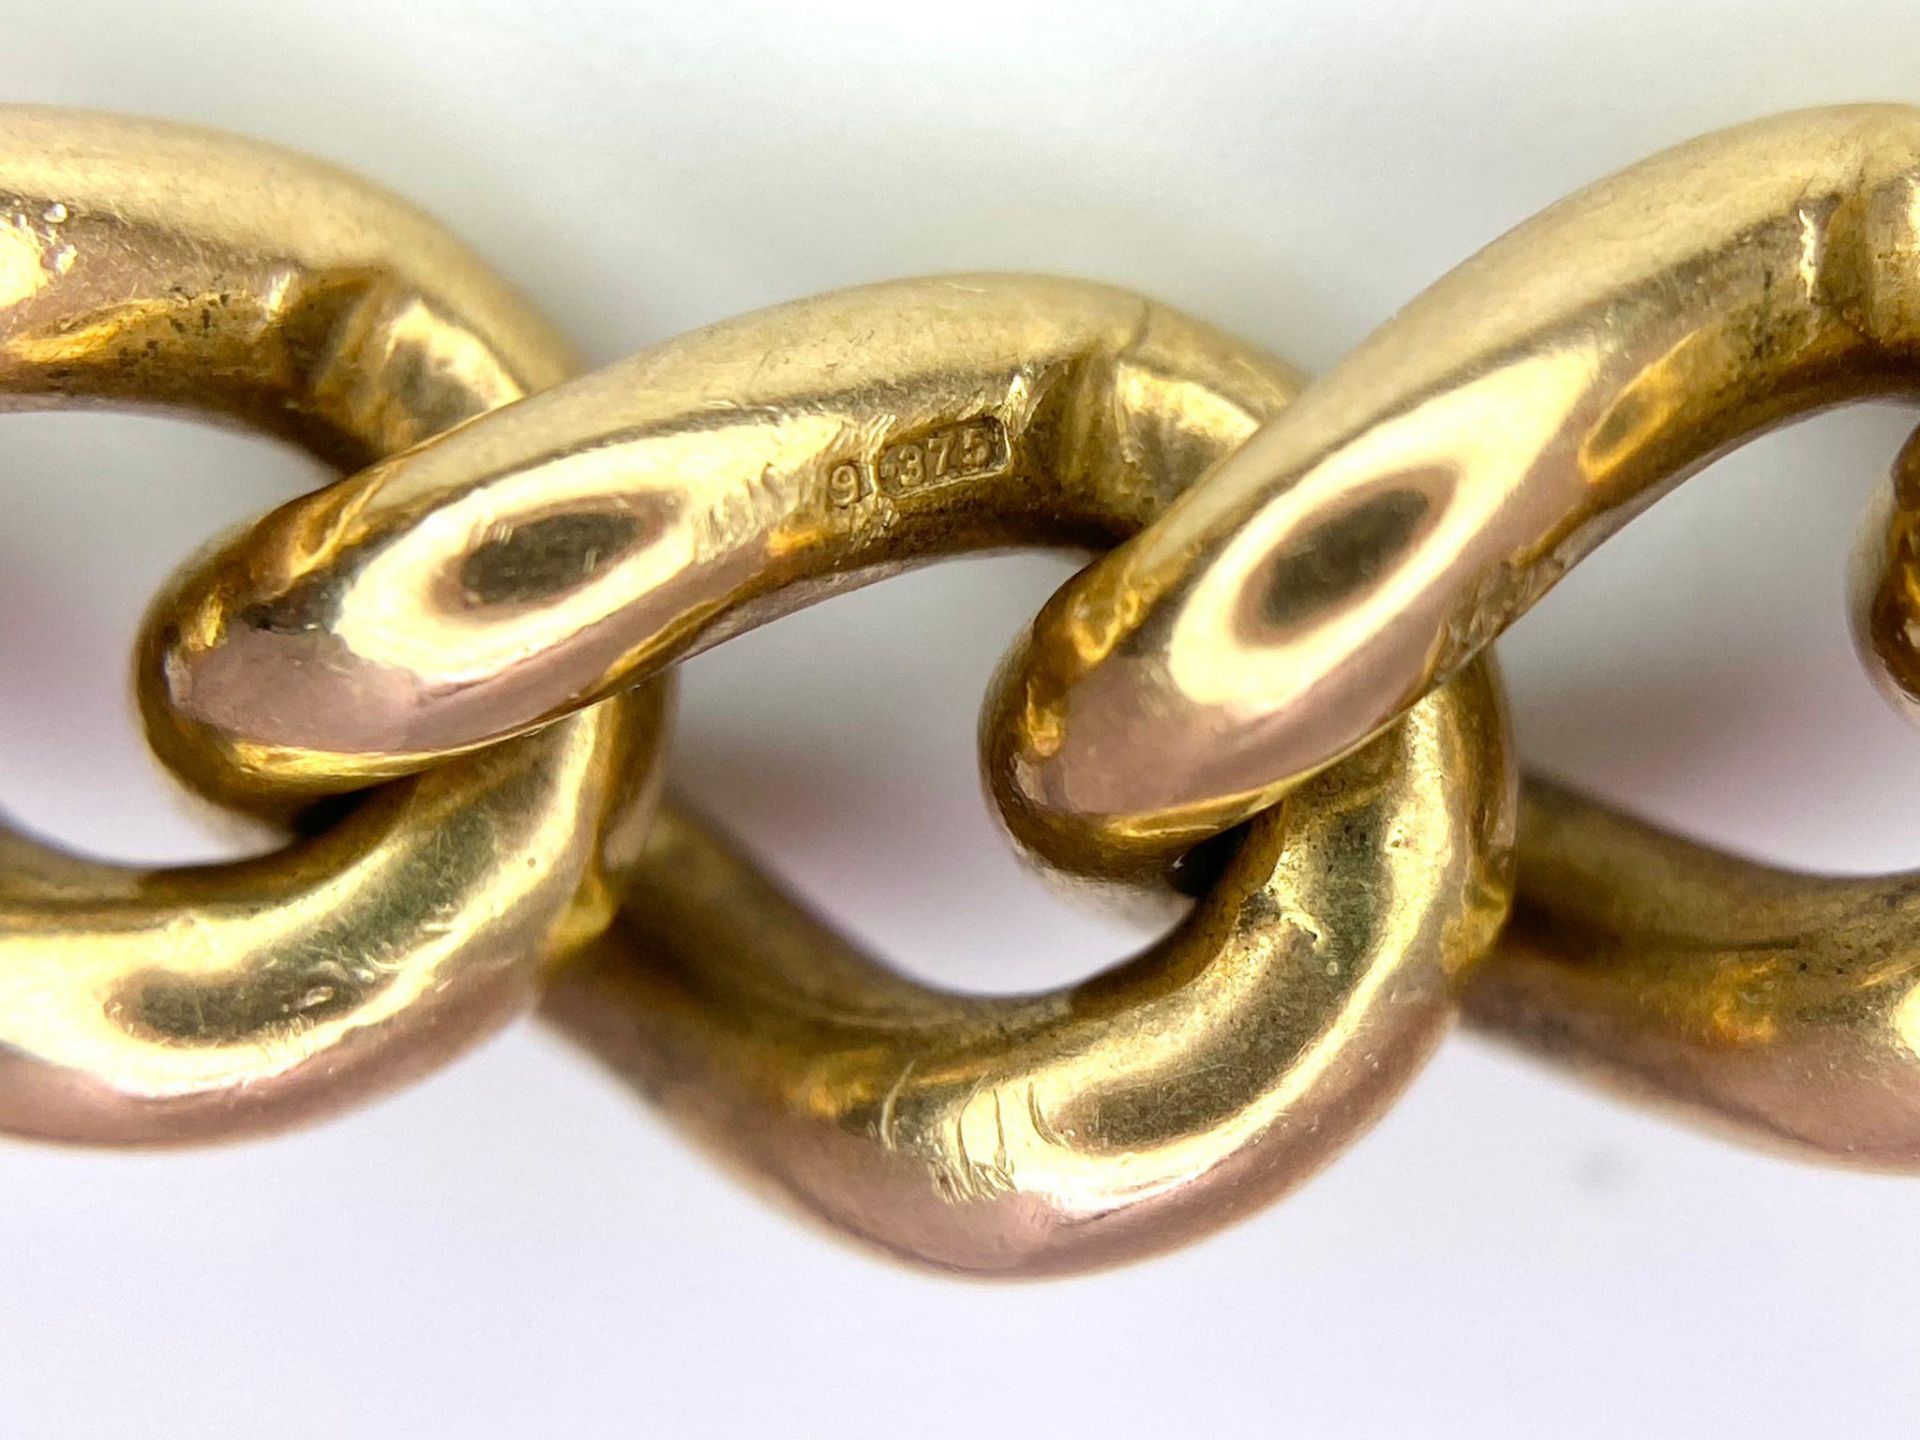 A Vintage 9K Yellow Gold Chunky Curb Link Bracelet with a Heart Clasp. 58g total weight. 17cm. - Bild 6 aus 8